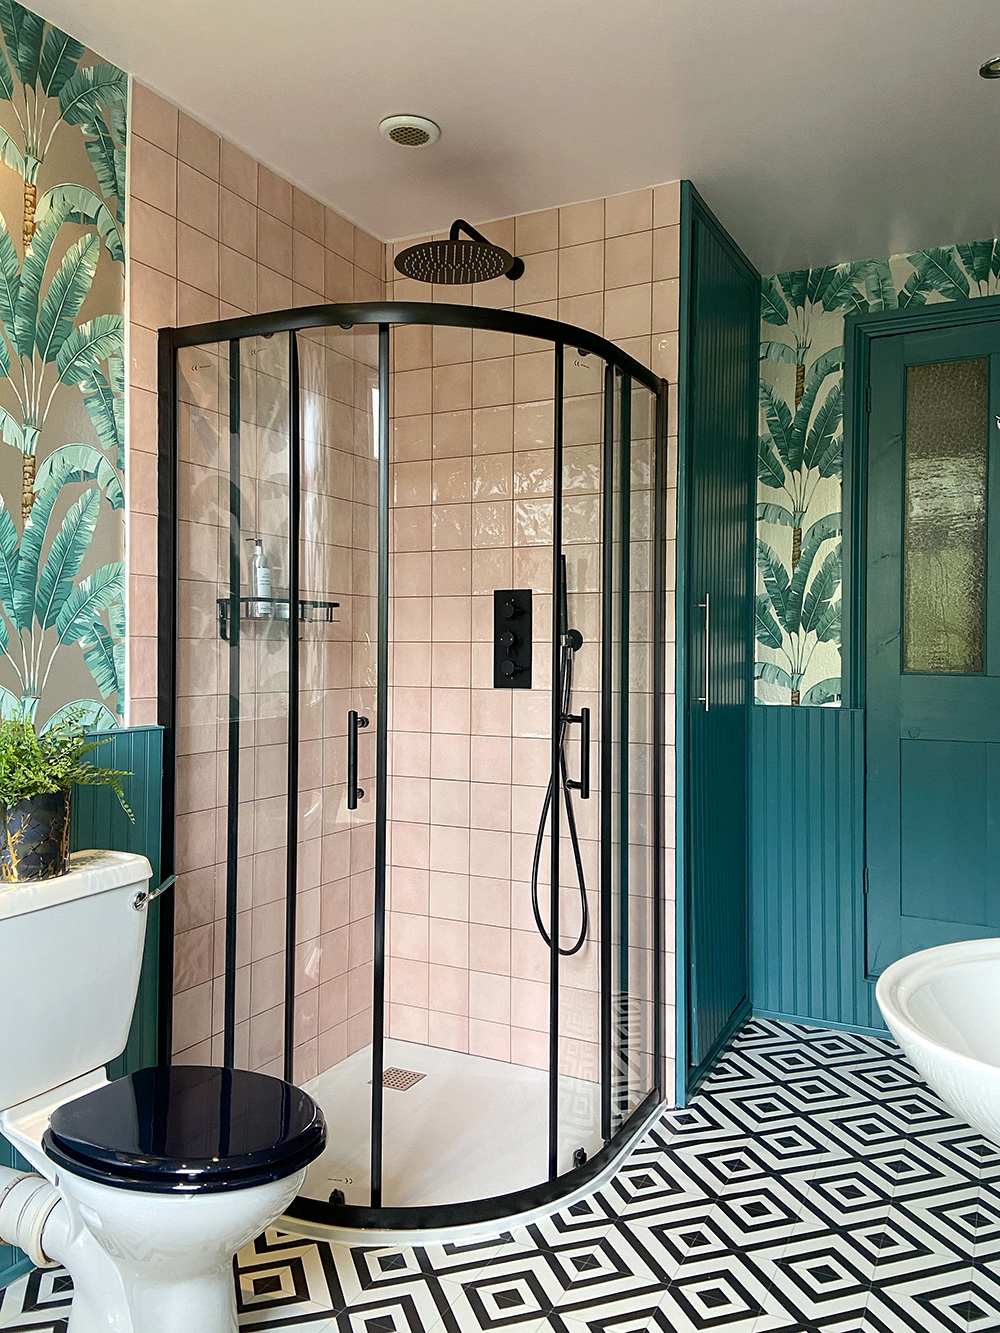 Tropical bathroom decor. Black shower enclosure with pink tiles, tropical wallpaper and monochrome patterned vinyl flooring